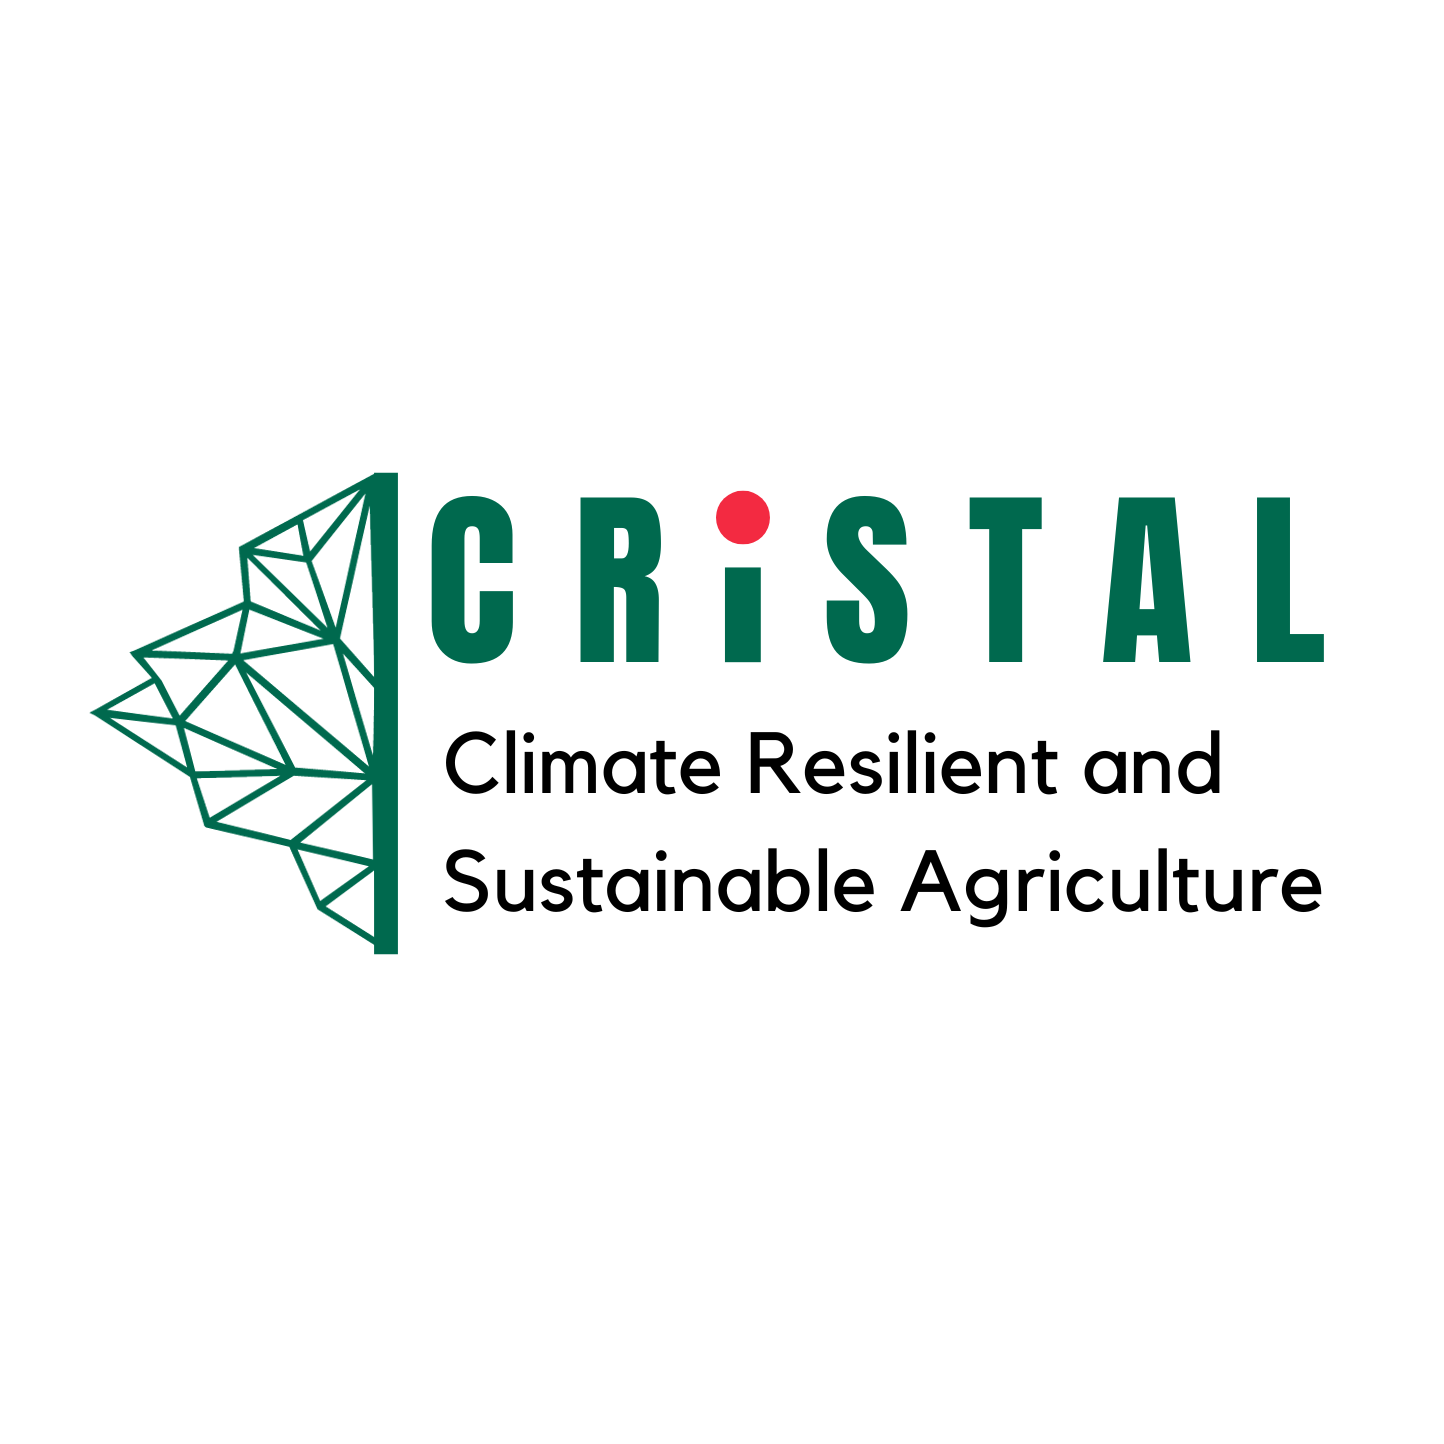 CRiSTAL: Climate Resilient and Sustainable Agriculture